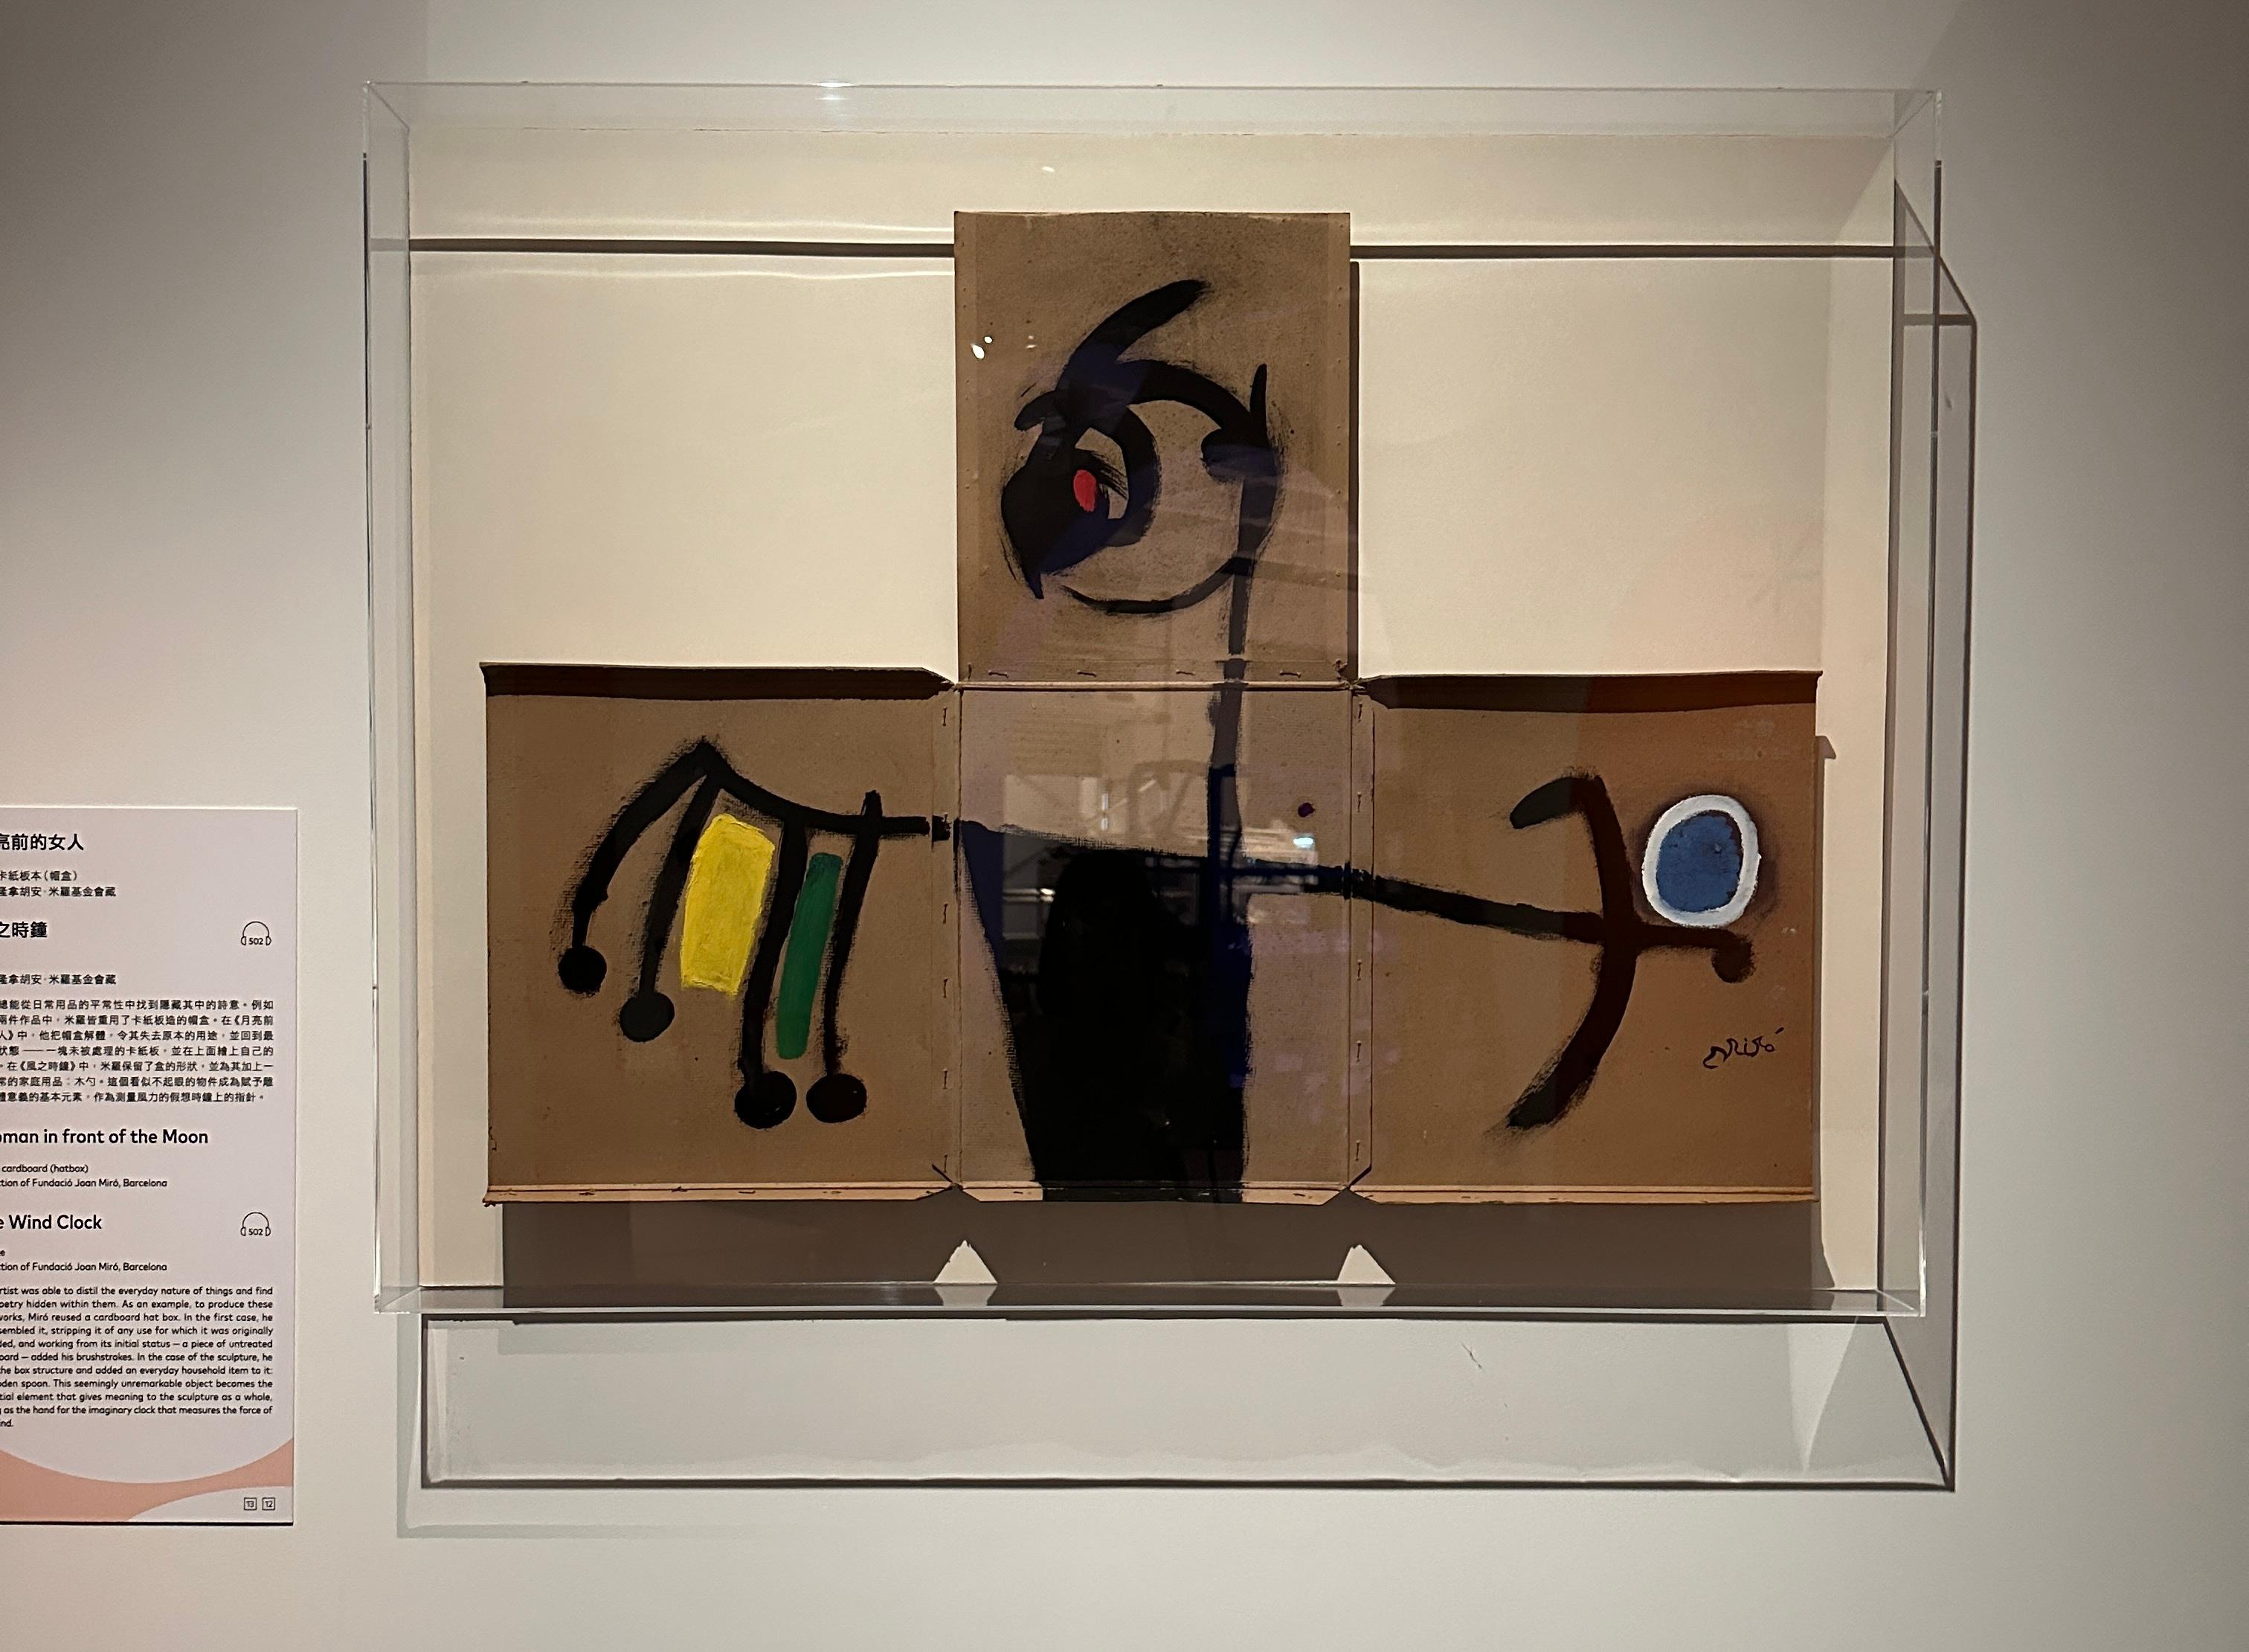 How Joan Miró, Spanish artist, explored 'the meaning of life' through  everyday objects shown in Hong Kong Museum of Art exhibition